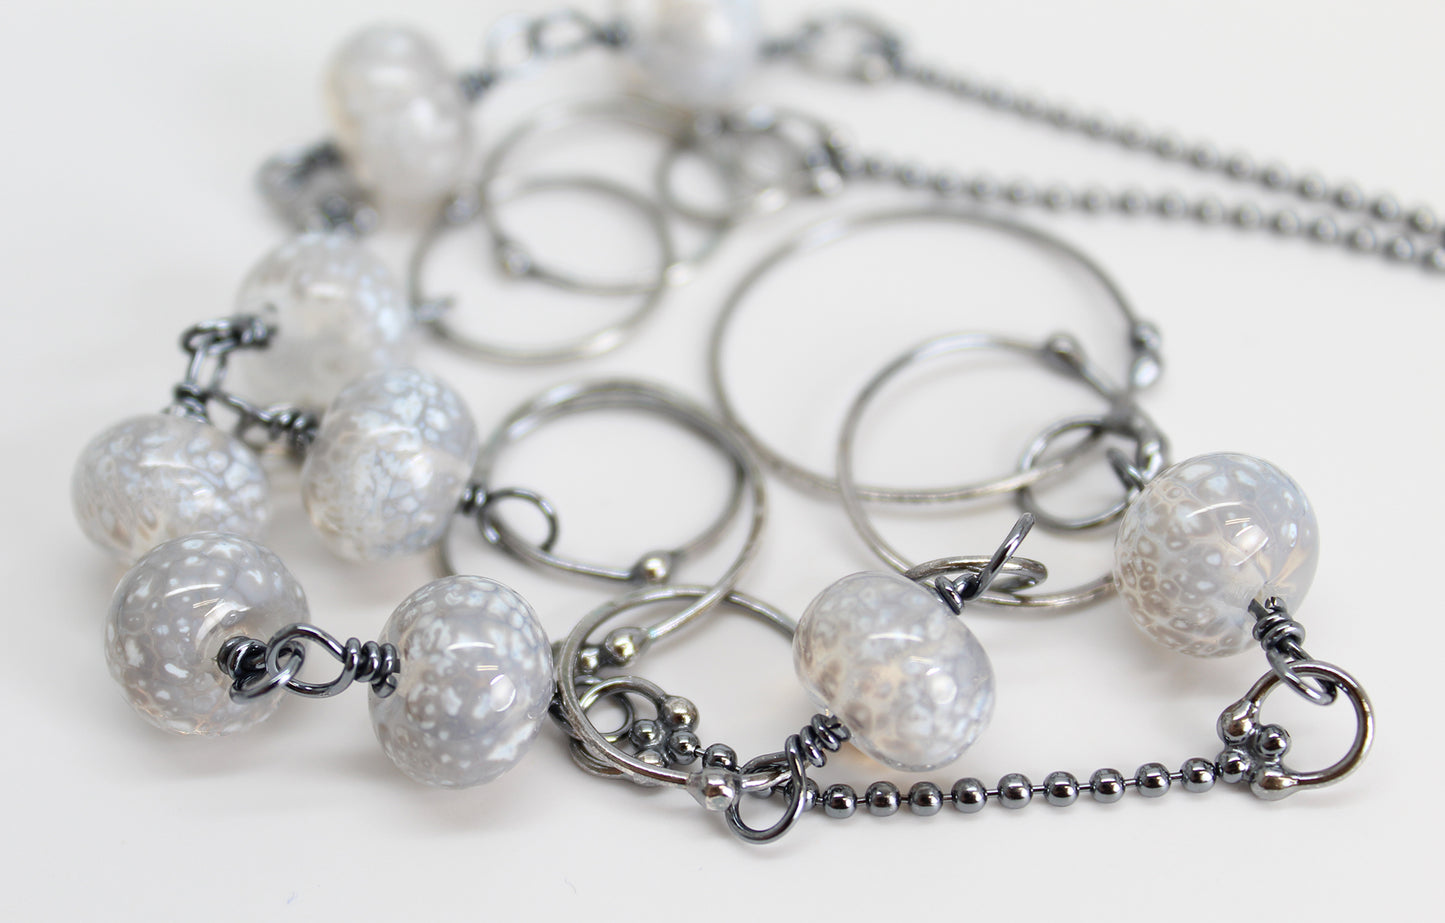 Handmade Sterling Silver Chain Necklace with White Lampwork Beads